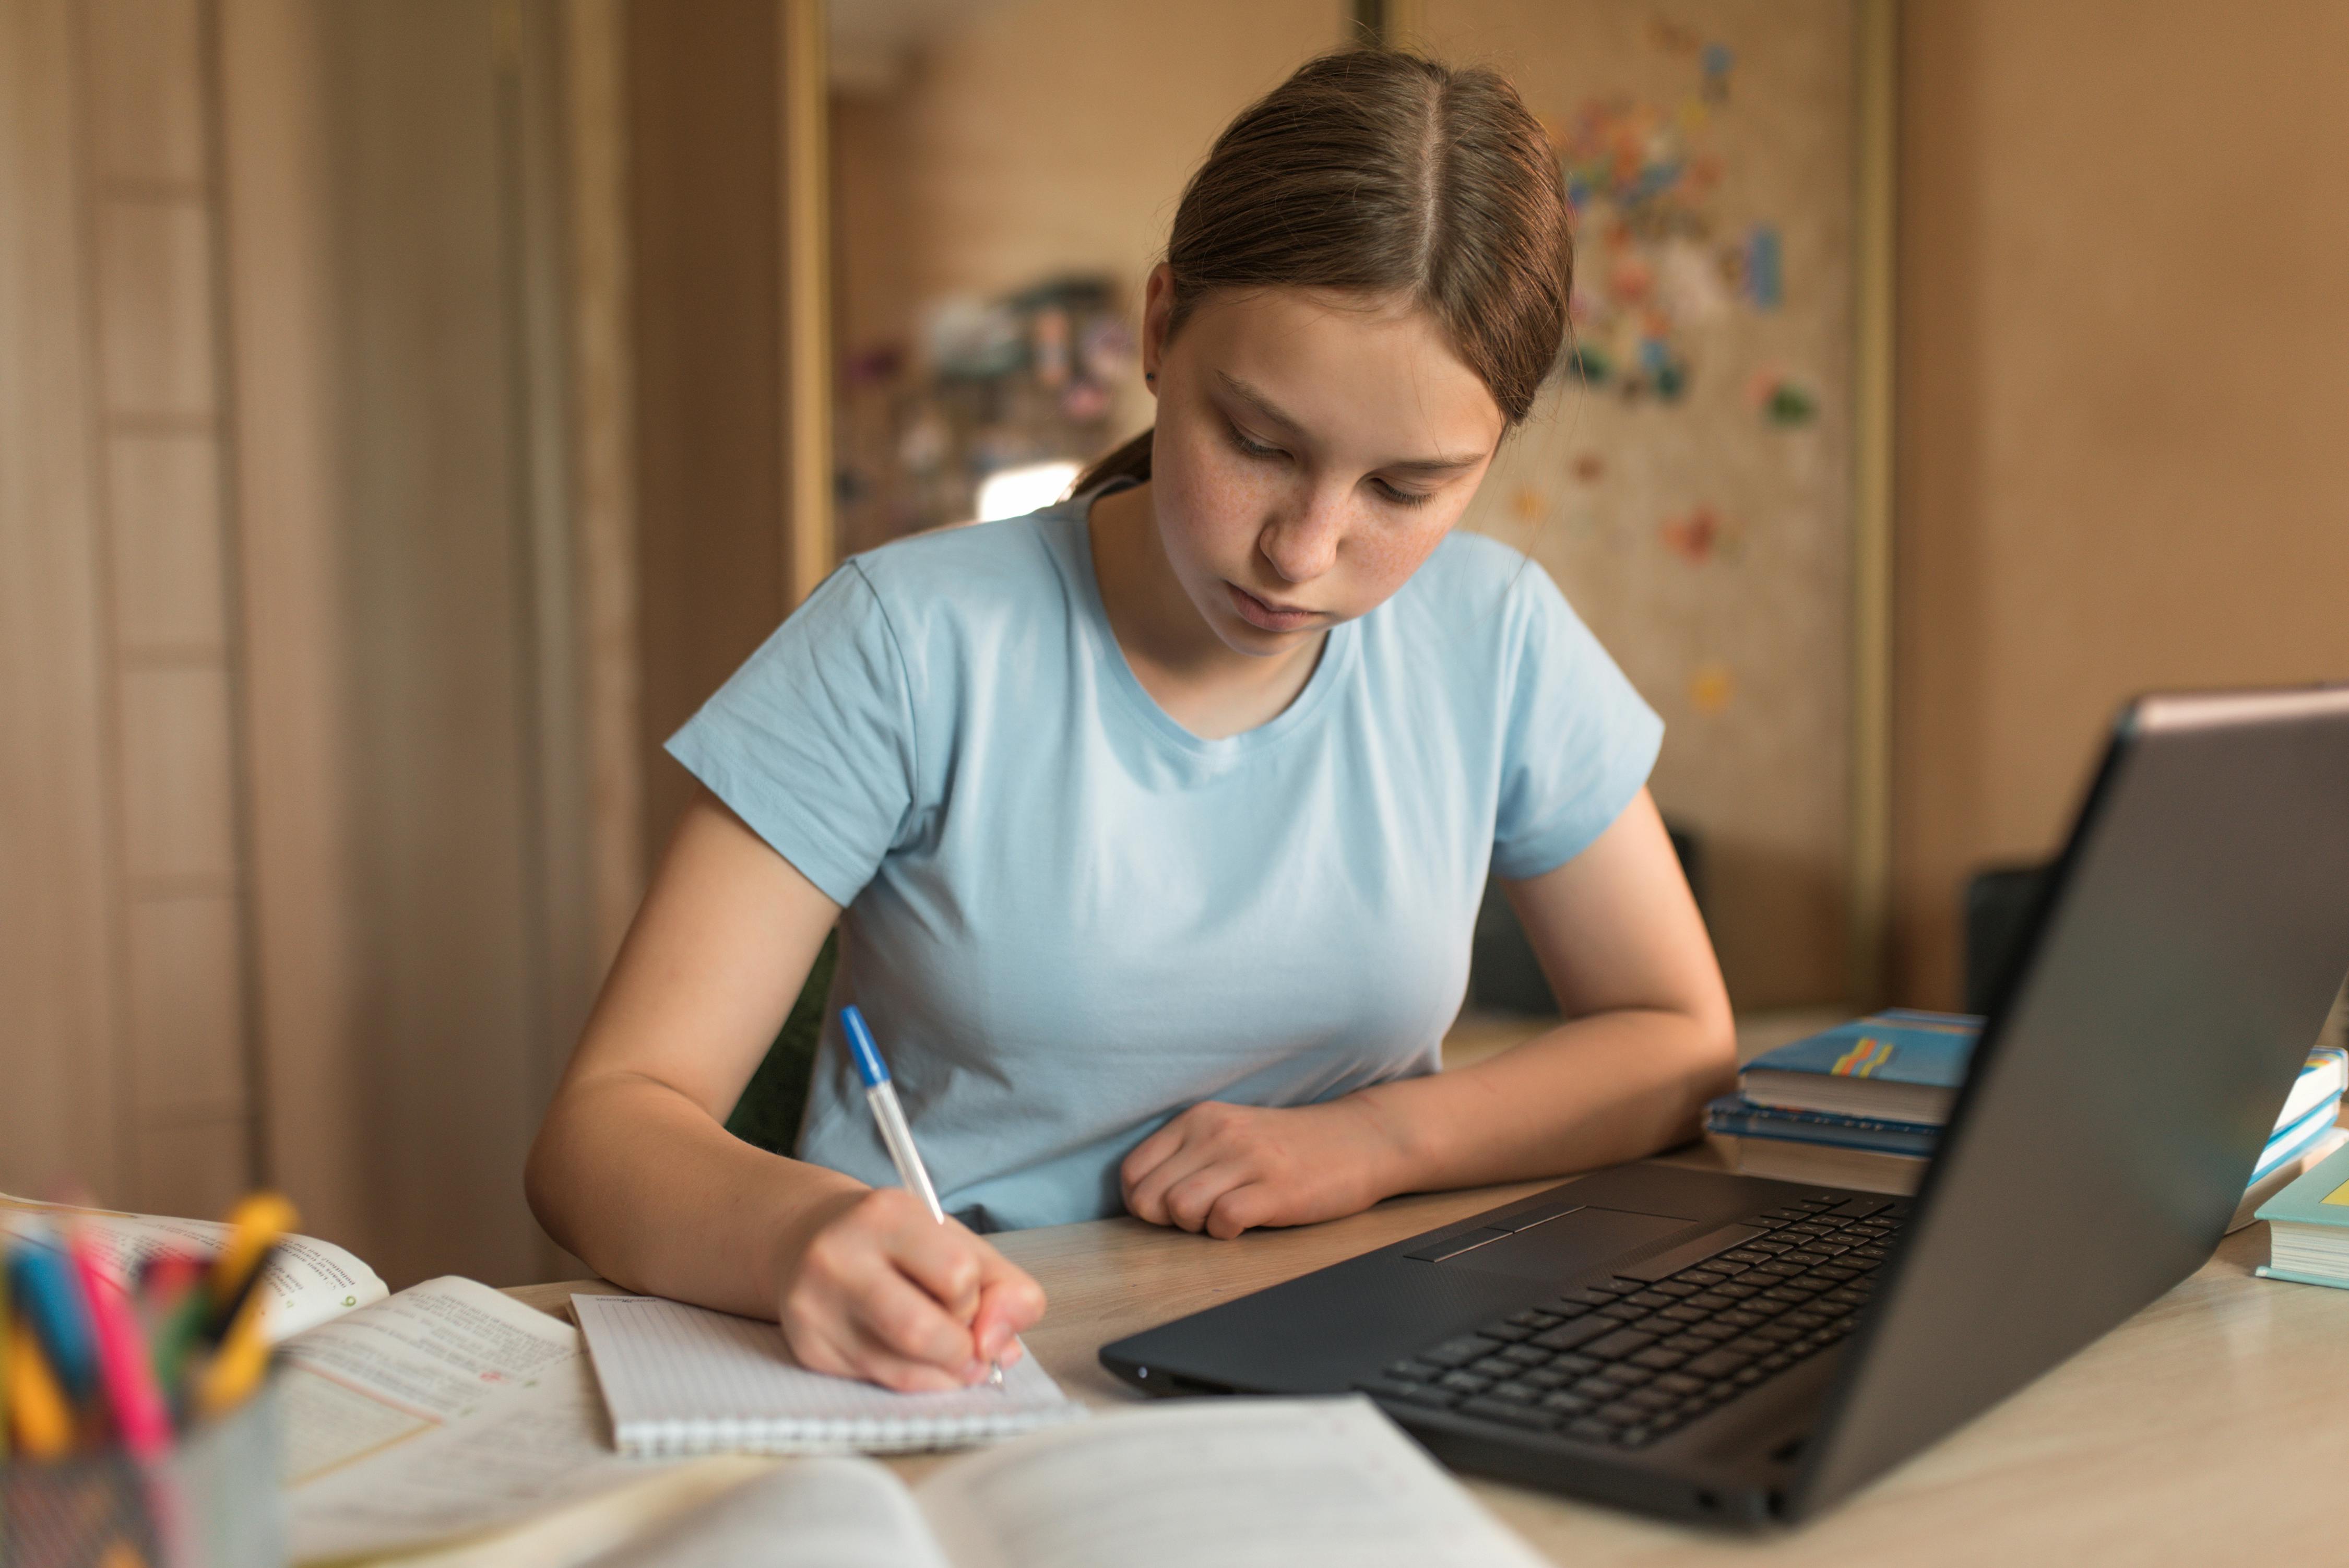 A teen girl sitting at a desk with some books and a laptop, writing in a notebook.